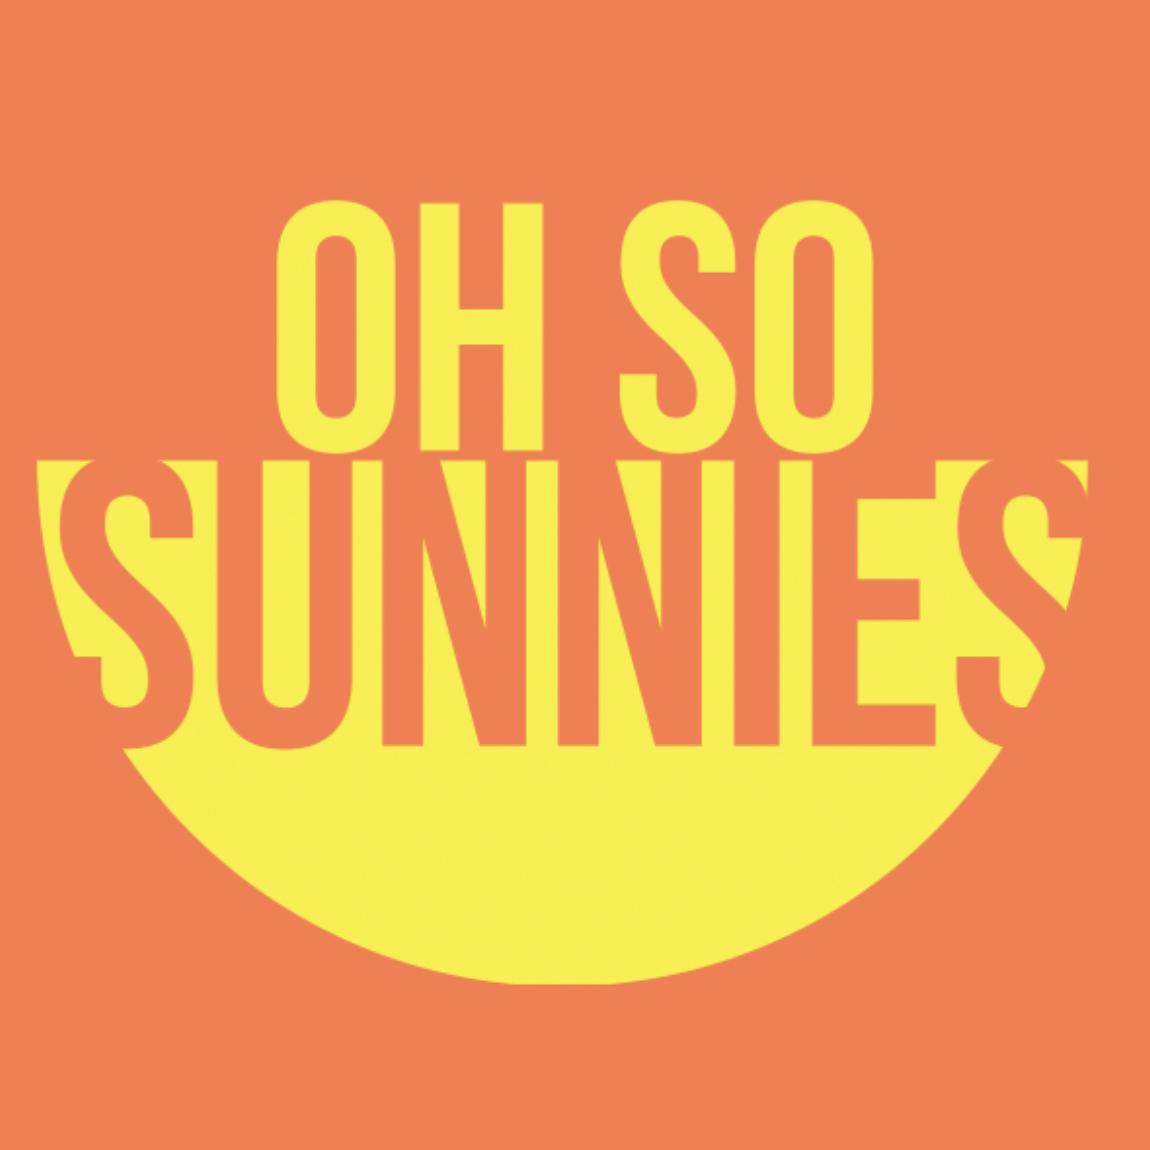 Oh So Sunnies's images